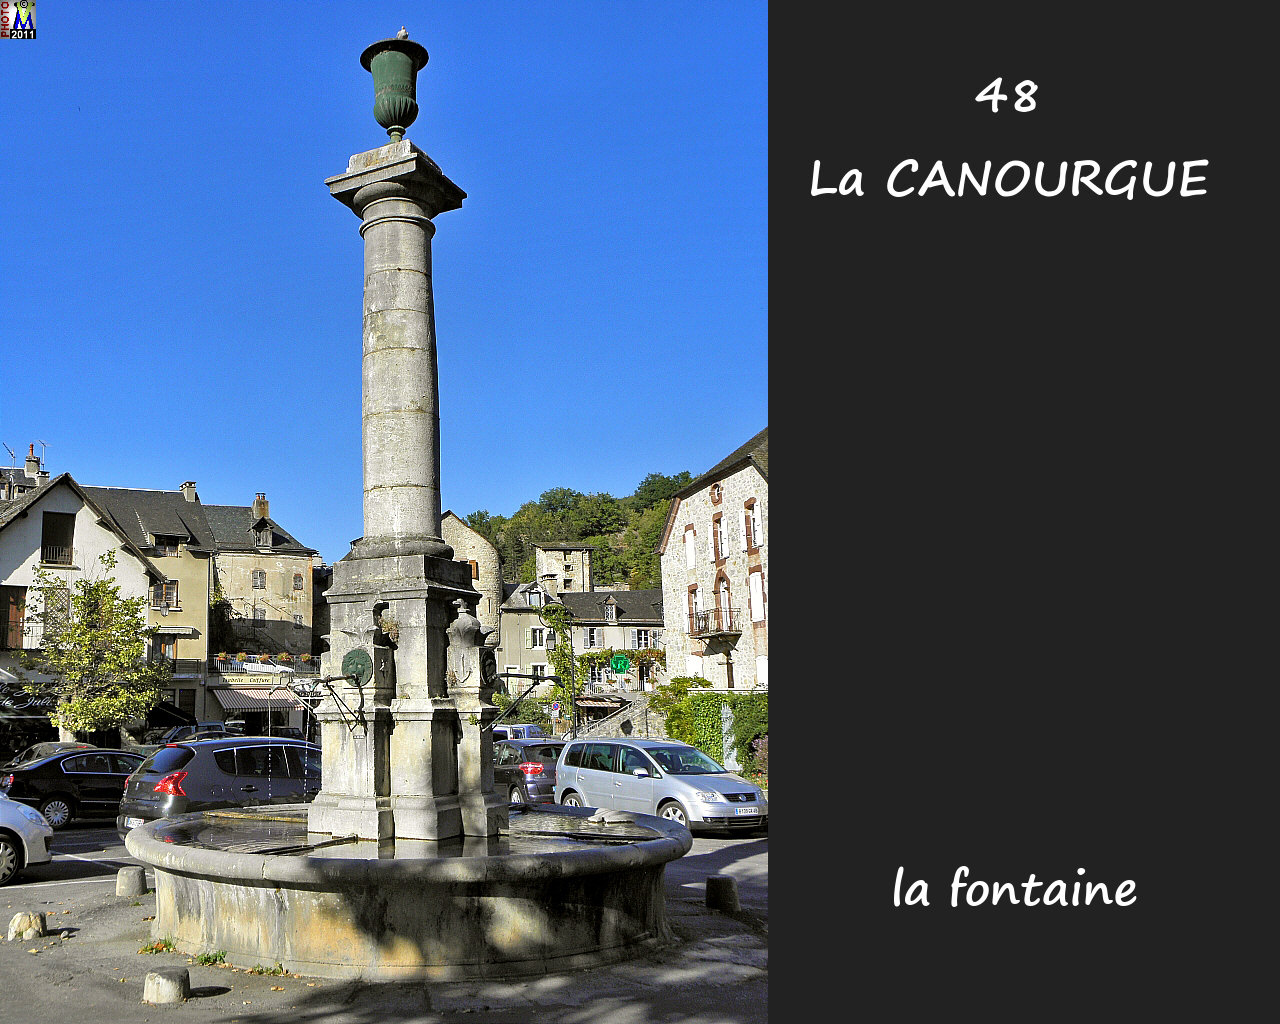 48CANOURGUE_fontaine_100.jpg